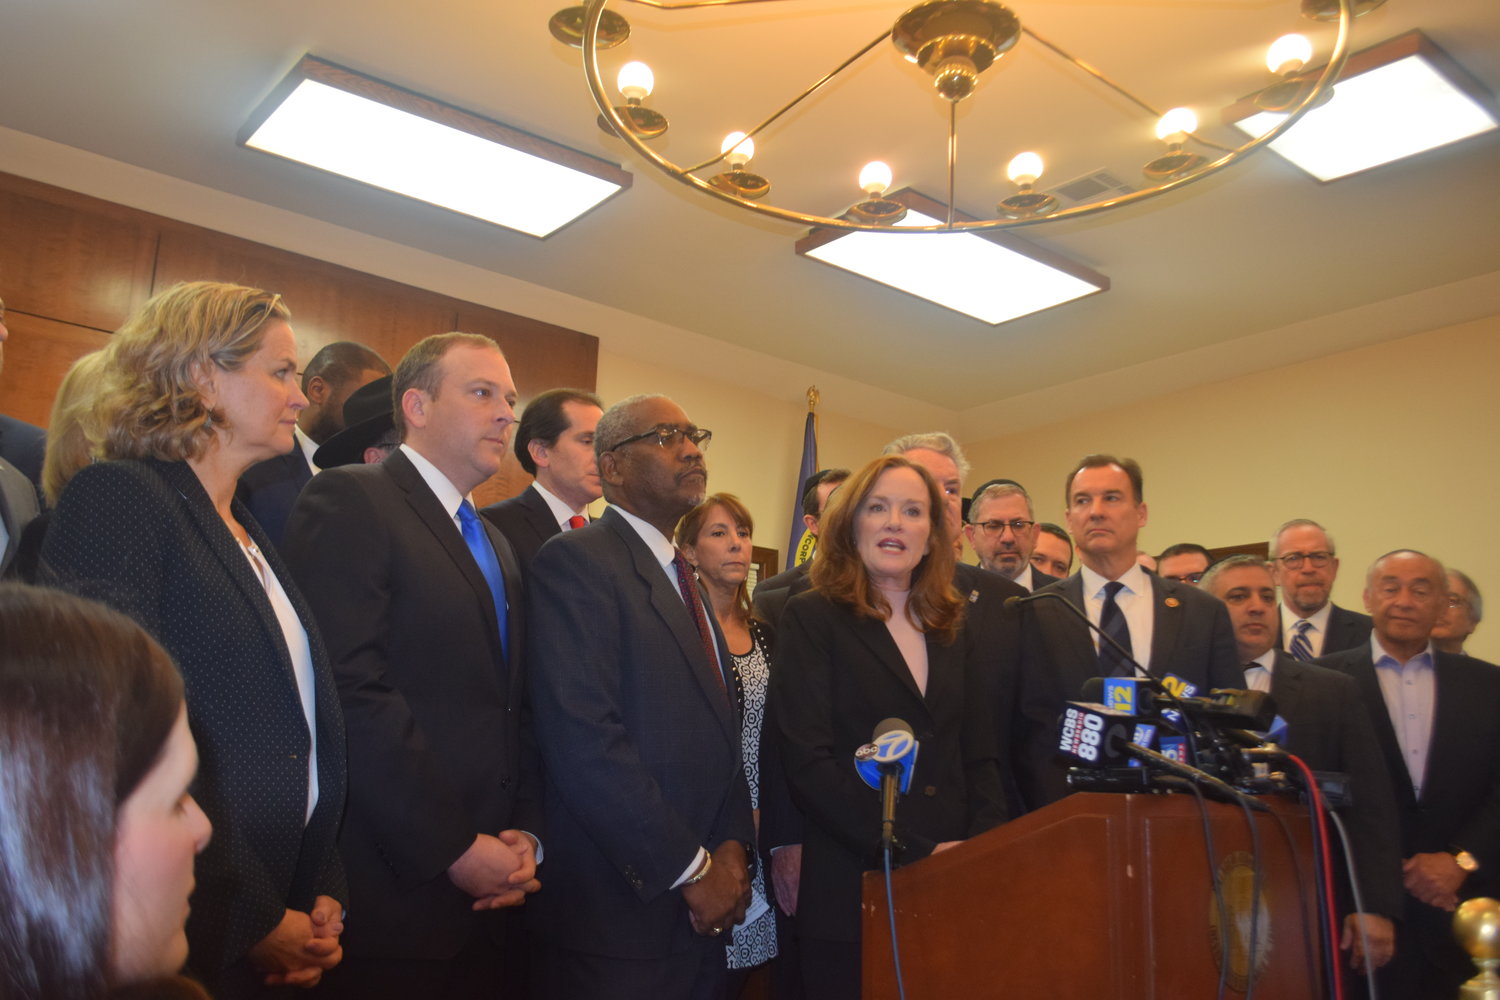 Rep. Kathleen Rice led the Long Island congressional delegation and other elected and appointed officials on Jan. 3, vowing to fight the recent rise of anti-Semitic violence.